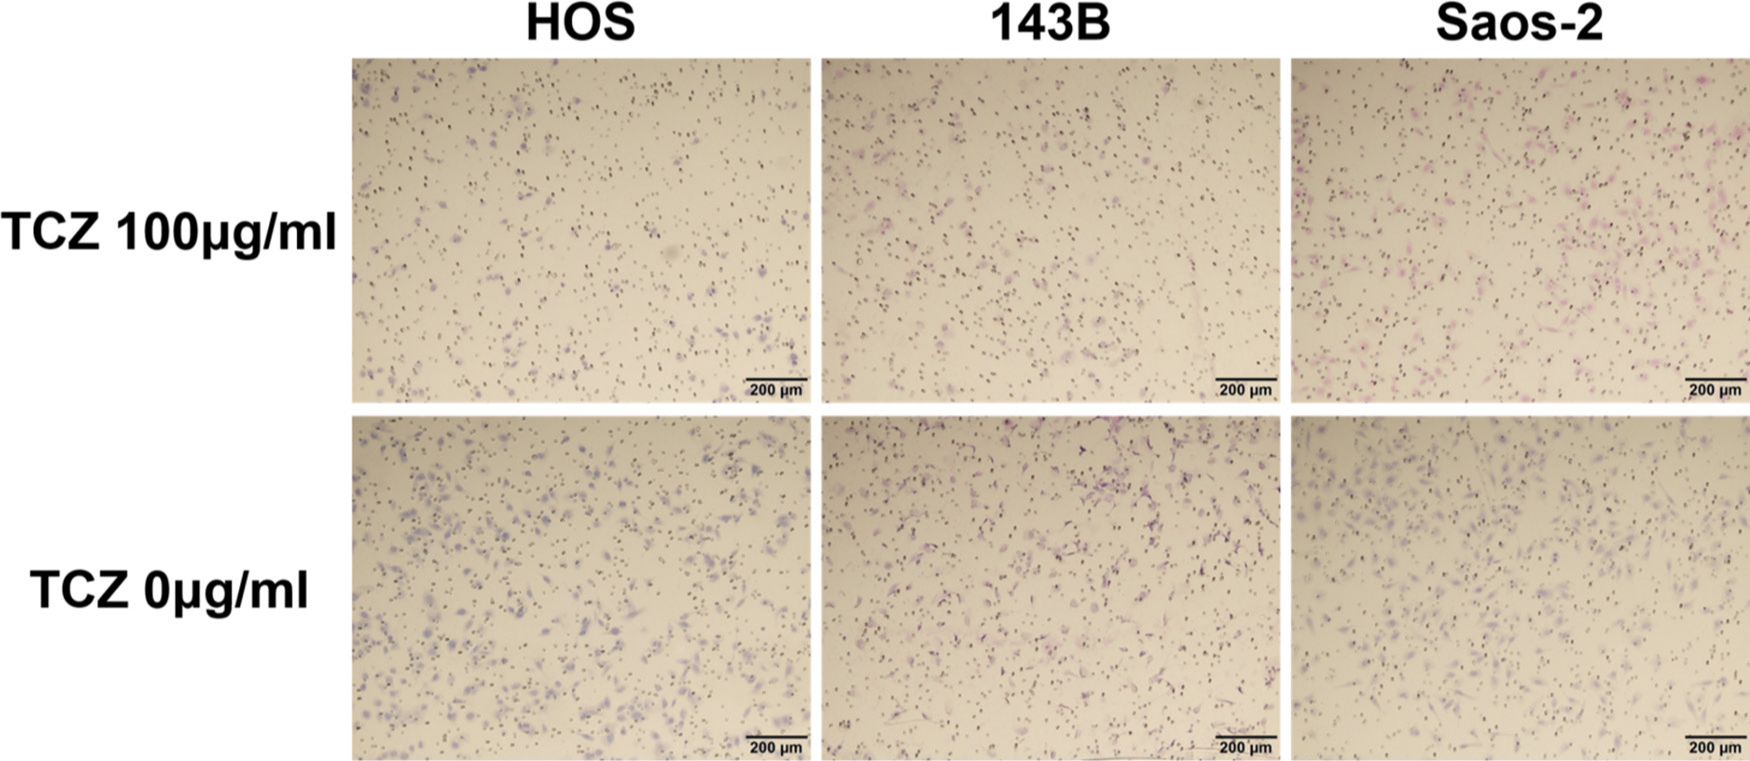 Fig. 7 
            Upper row shows the effect of tocilizumab (TCZ) treatment on invasion of 143B, HOS, and Saos-2 cells. Lower row shows the invasion of 143B, HOS, and Saos-2 cells without TCZ treatment.
          